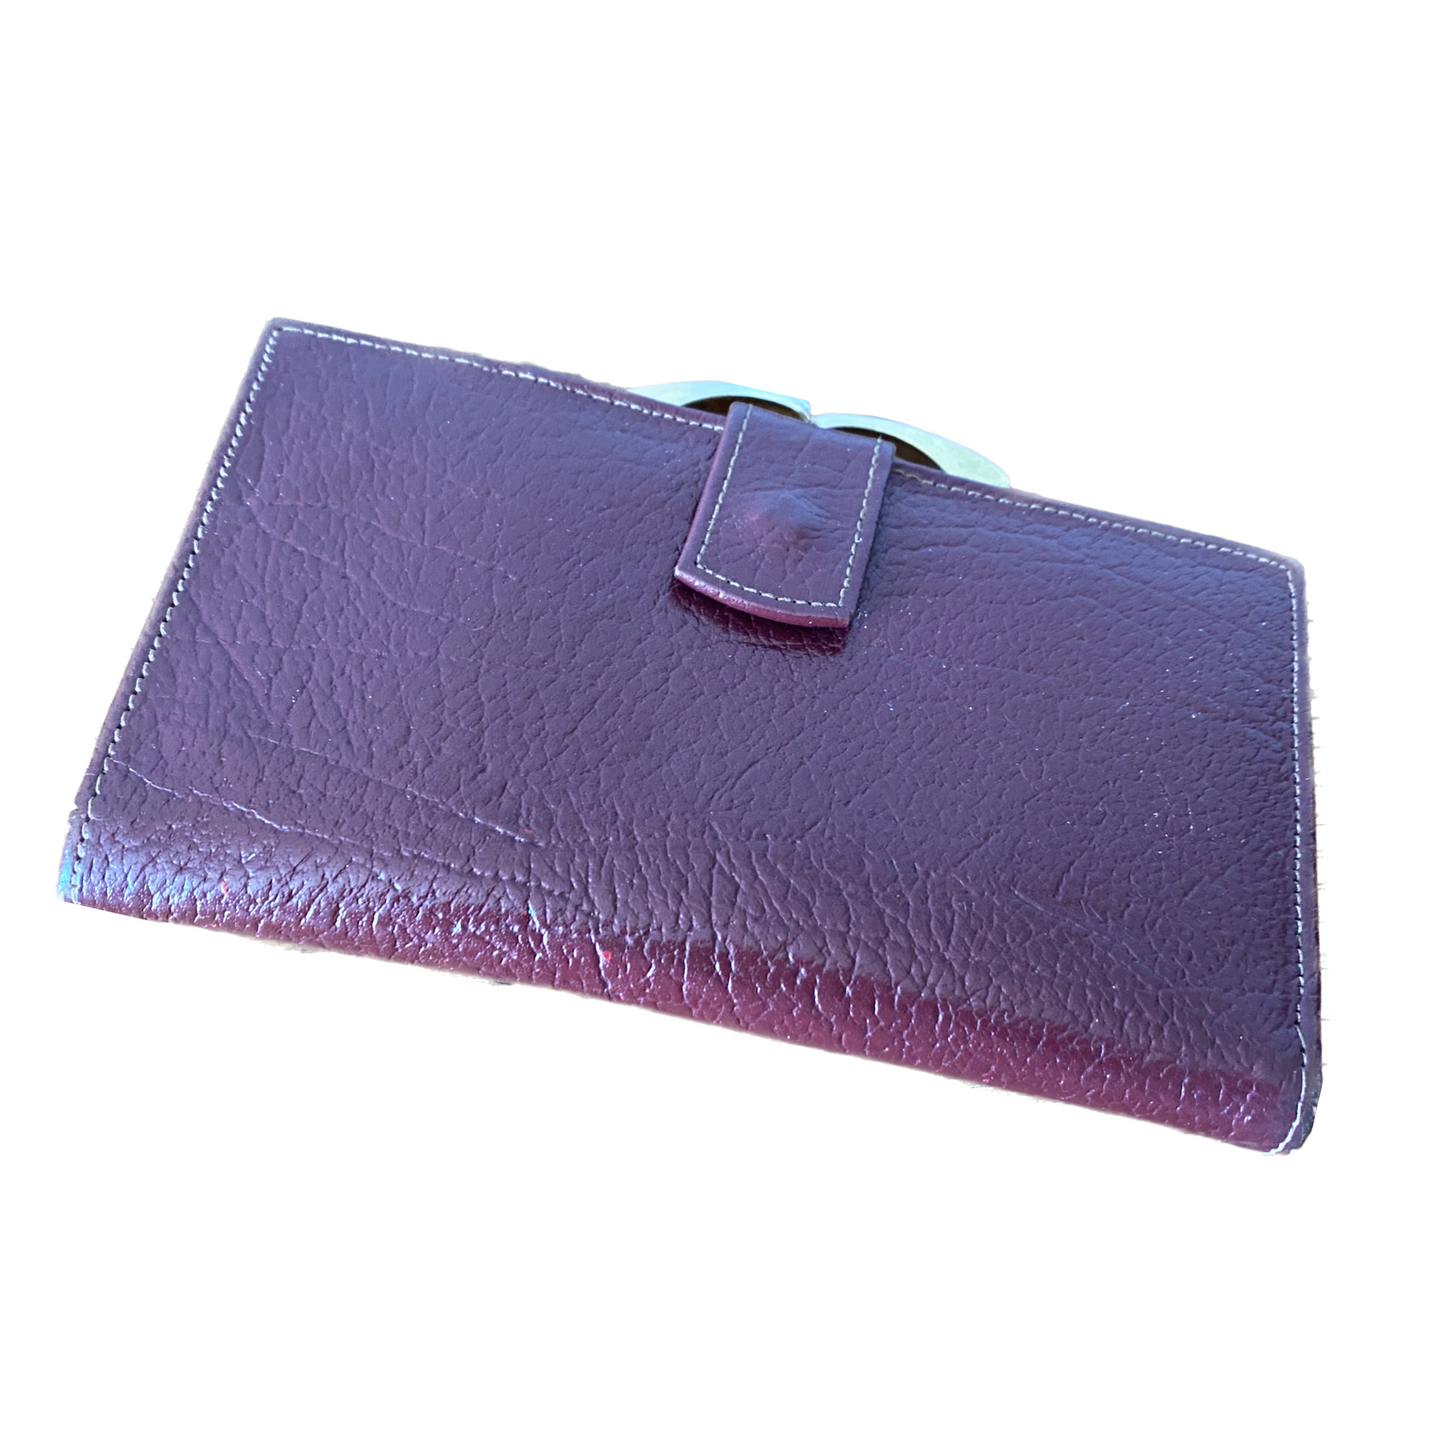 Textured wine red/brown leather wallet with a covered  popper opening and gold-tone metal frame